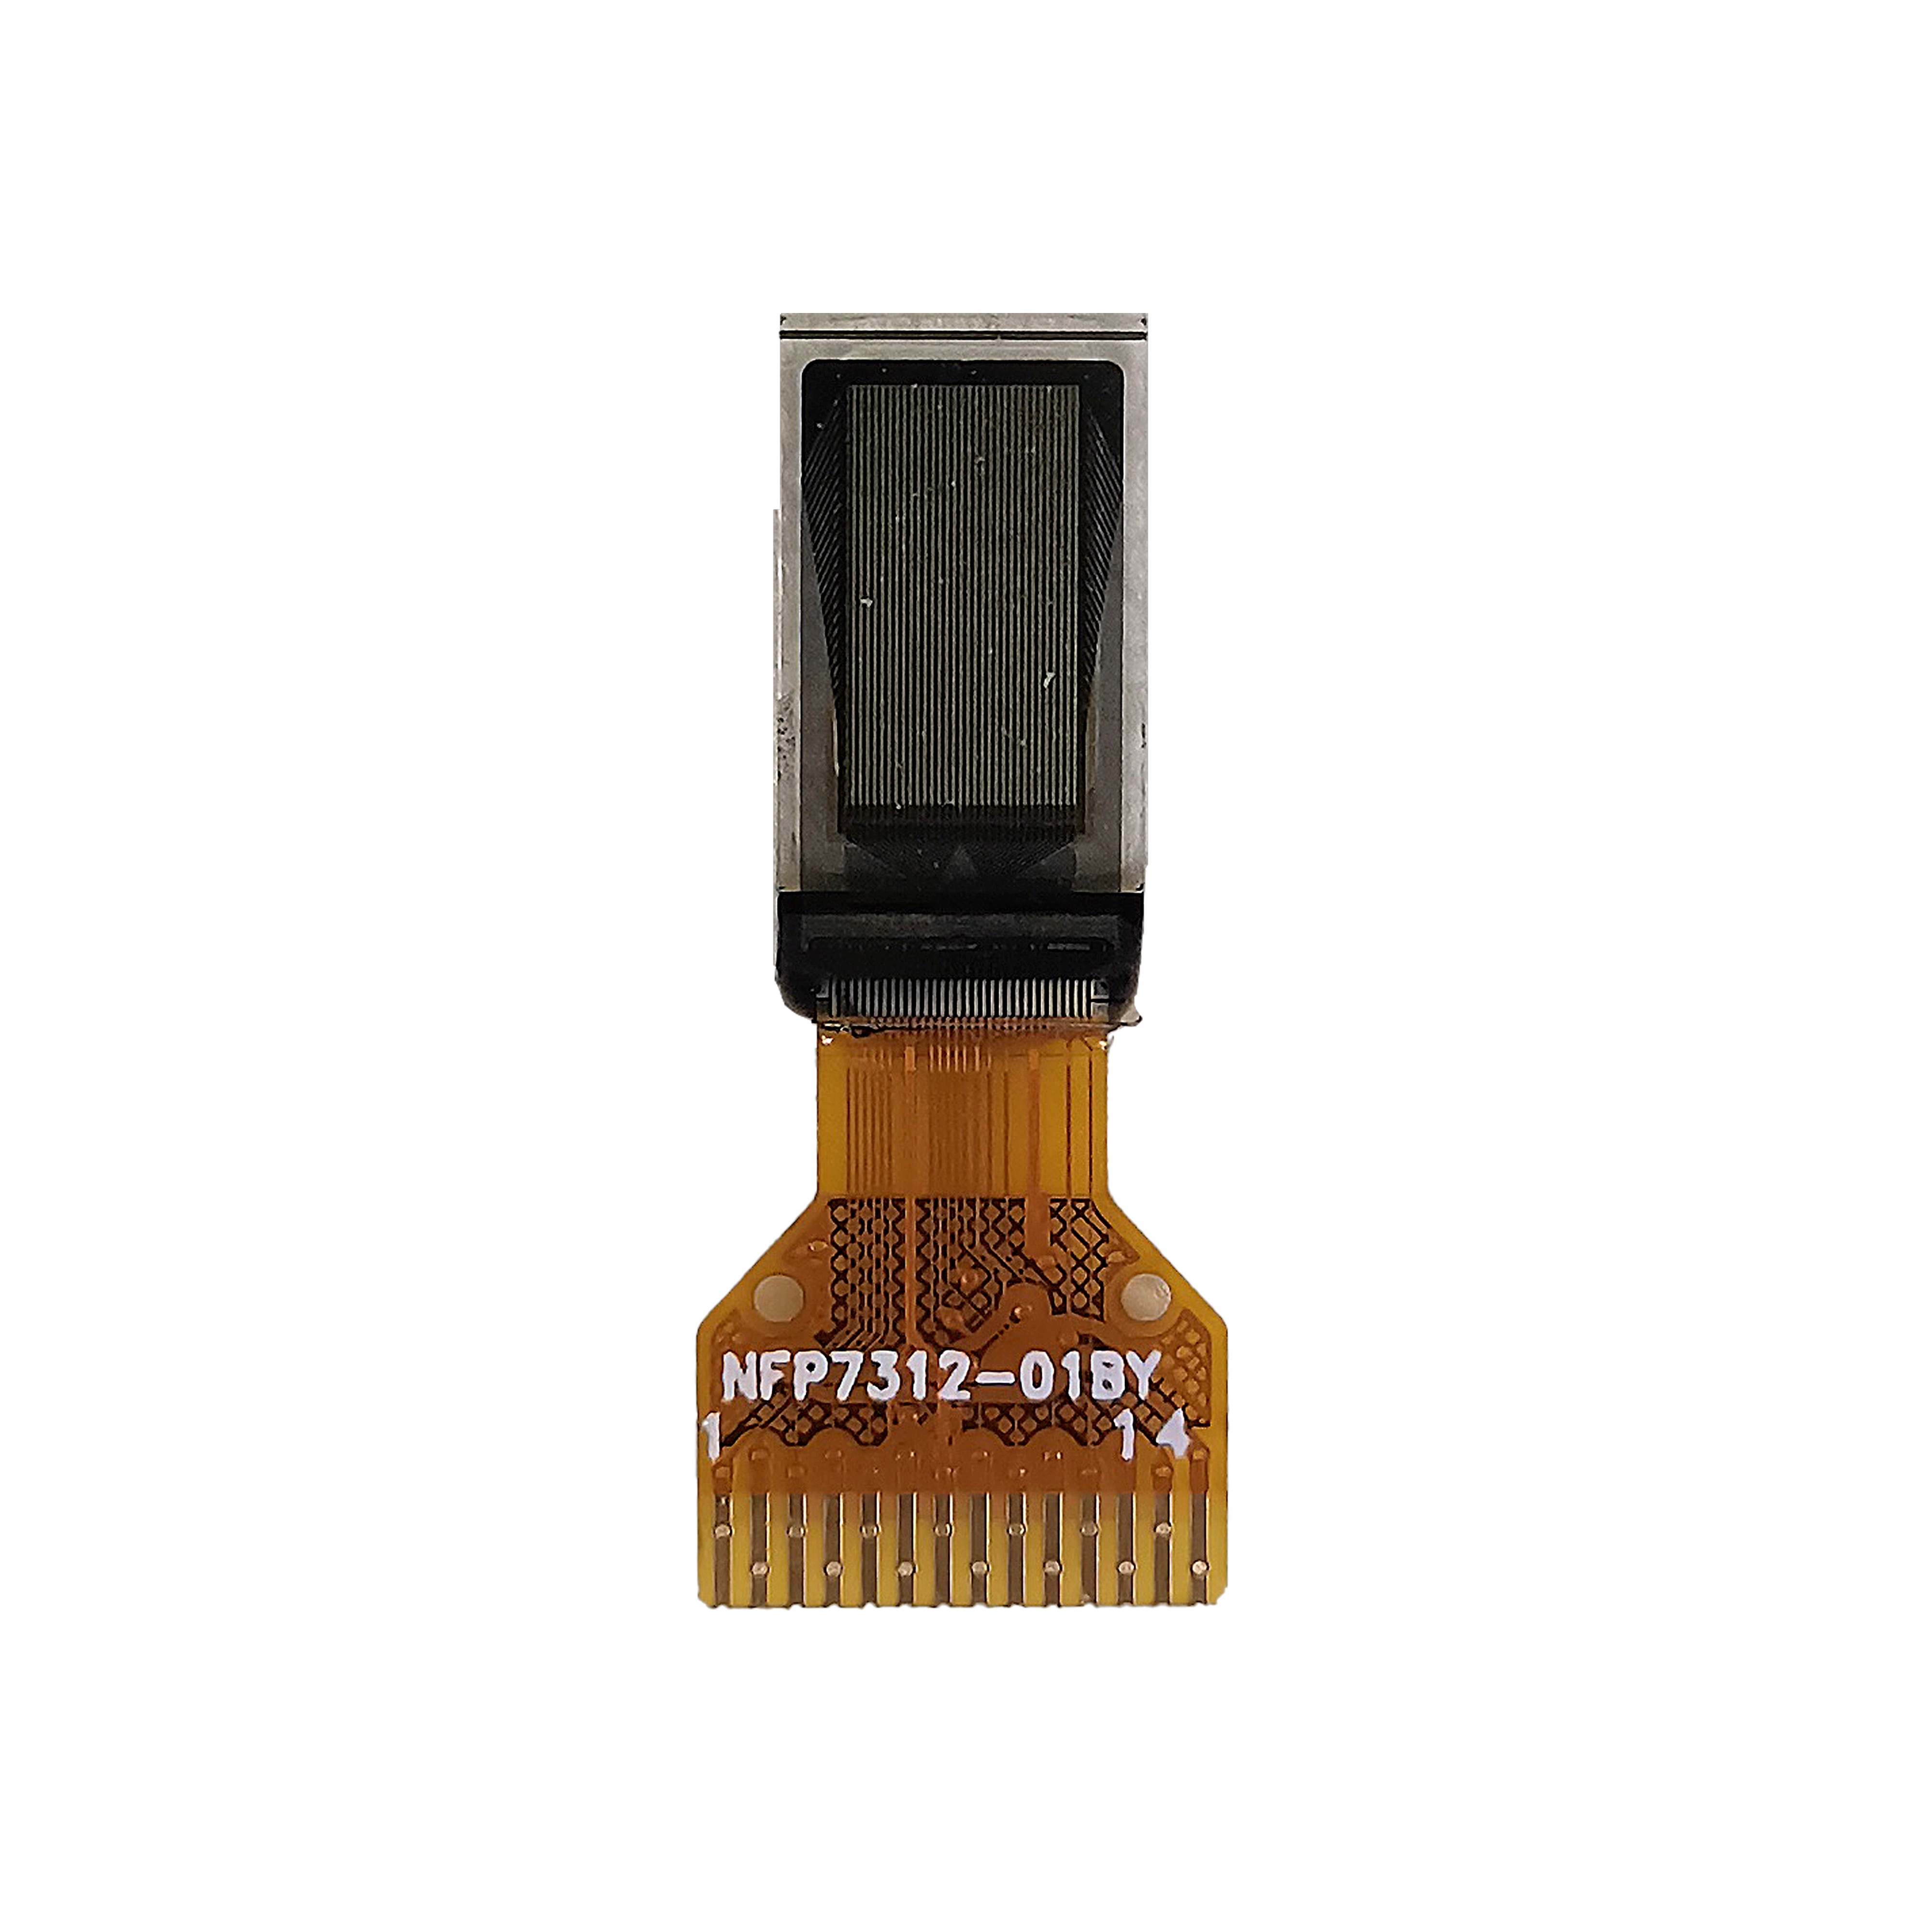 X031-3262TSWFG02N-H14 is a 0.31-inch passive matrix OLED display module which is made of 32 x 62 dots.  The module has the outline dimension of 6.2×11.88×1.0 mm and Active Area size 3.82 x 6.986 mm.